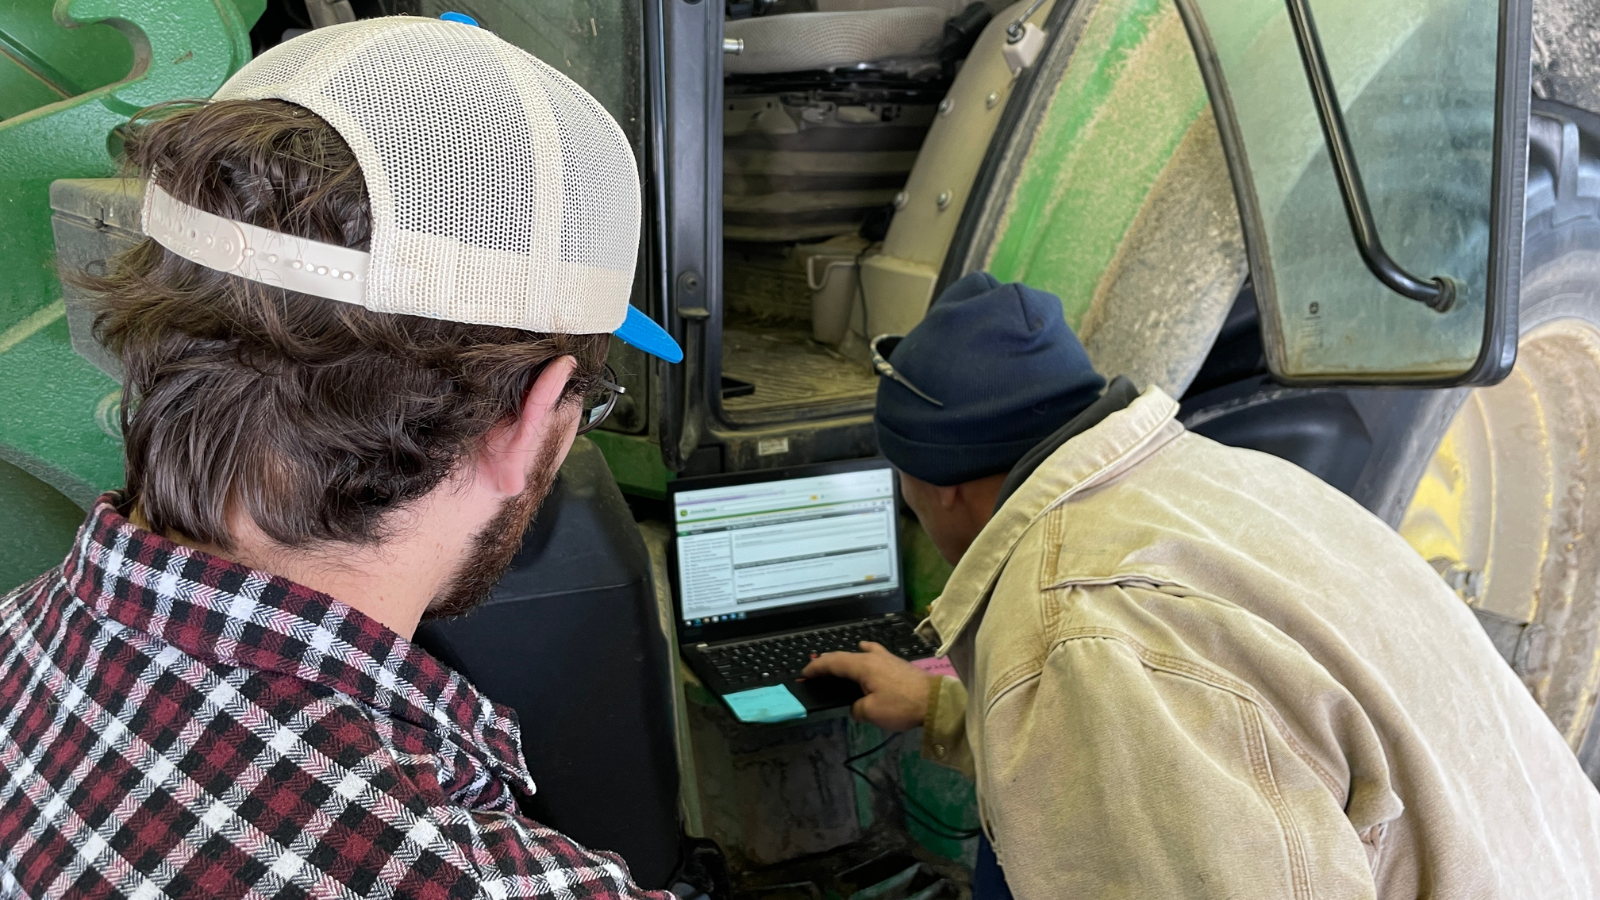 Right to Repair advocate Kevin O'Reilly and a mechanic look at Deere's software repair tools on a laptop connected to a green tractor